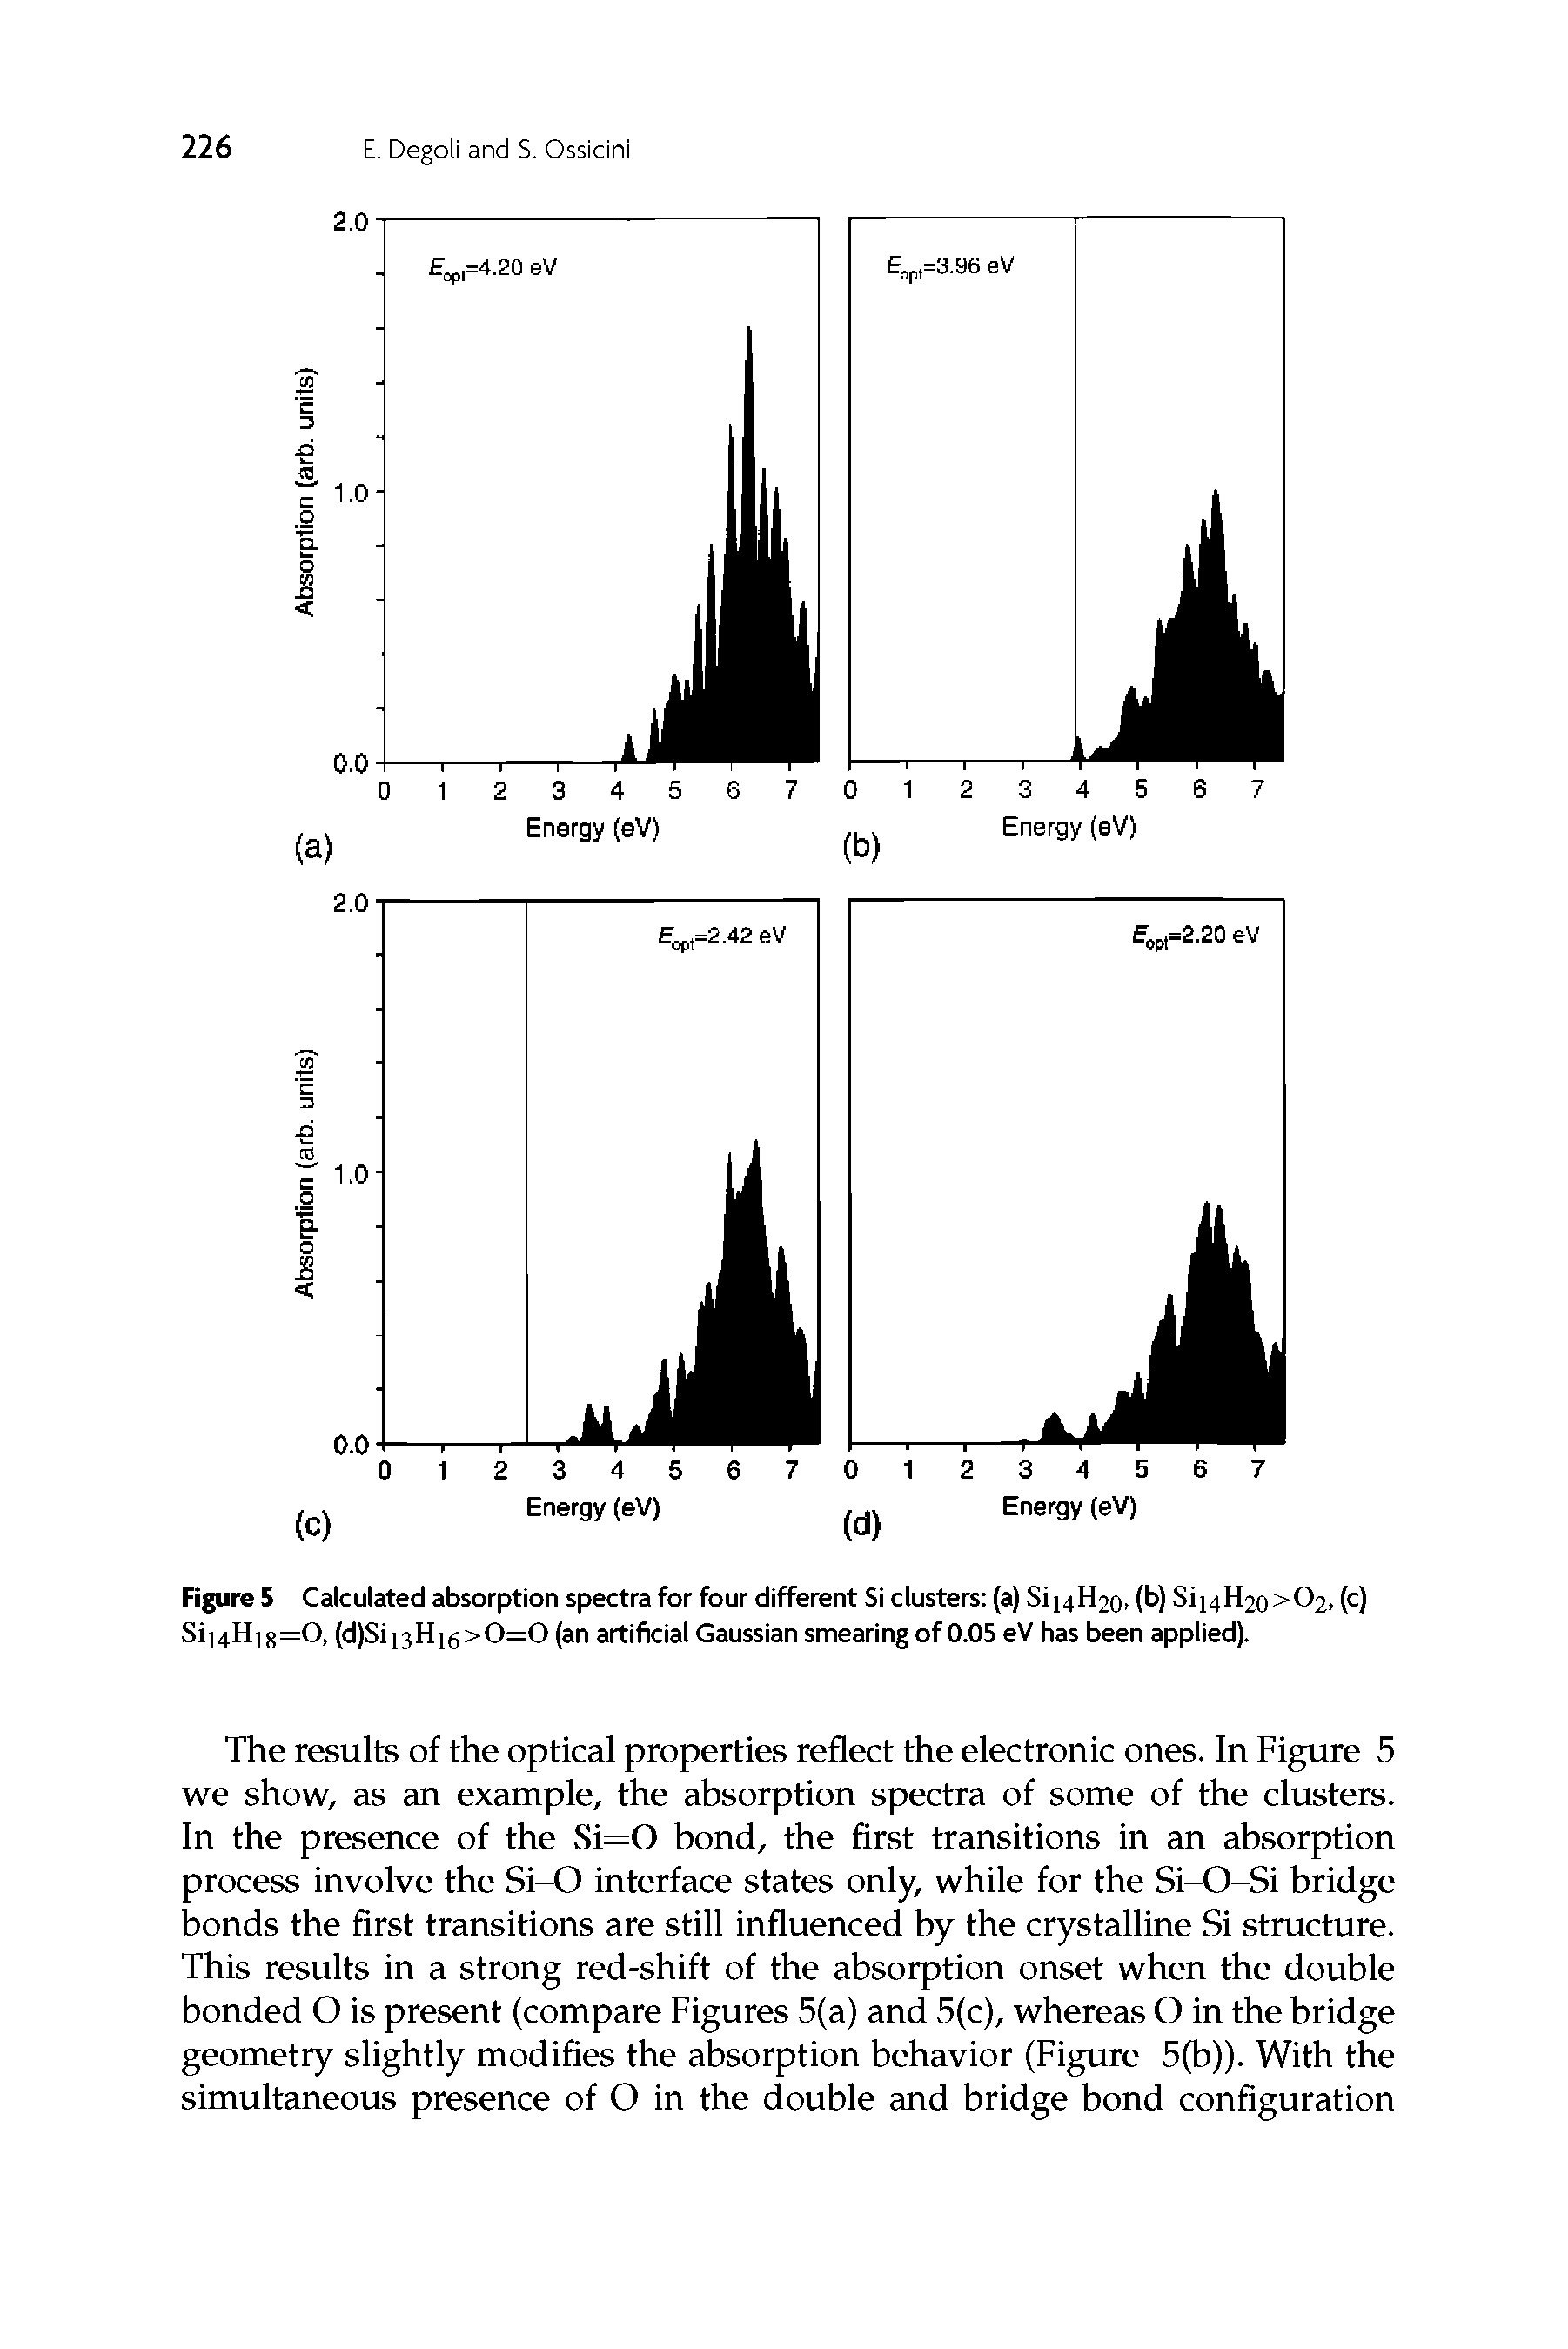 Figure 5 Calculated absorption spectra for four different Si clusters (a) Sii4H2o, (b) Sii4H2o>C>2, (c) Sii4Hi8=0, (d)Sii3Hi6>0=0 (an artificial Gaussian smearing of 0.05 eV has been applied).